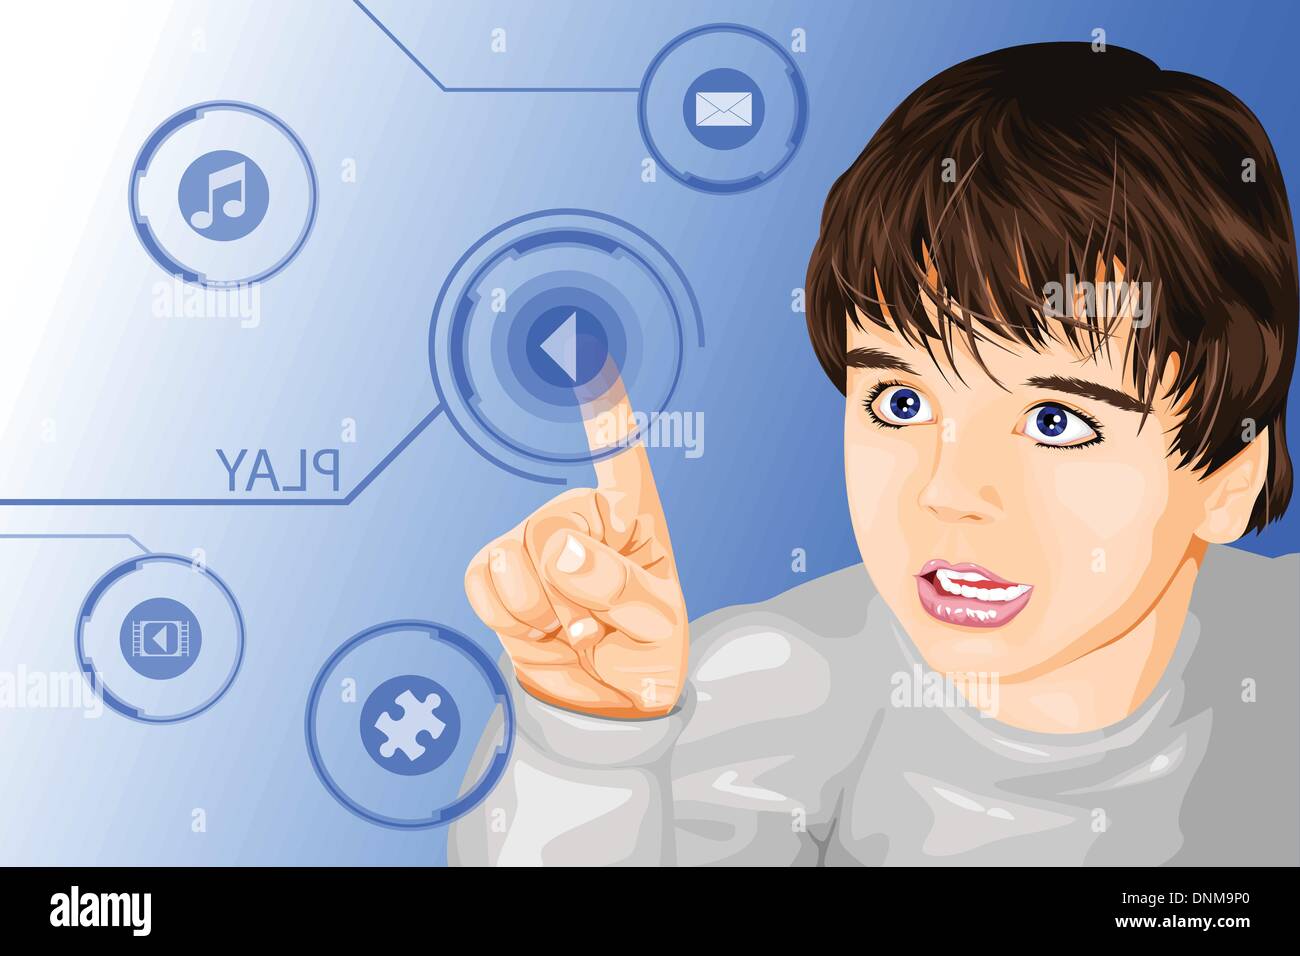 A vector illustration of a kid using a modern futuristic technology Stock Vector